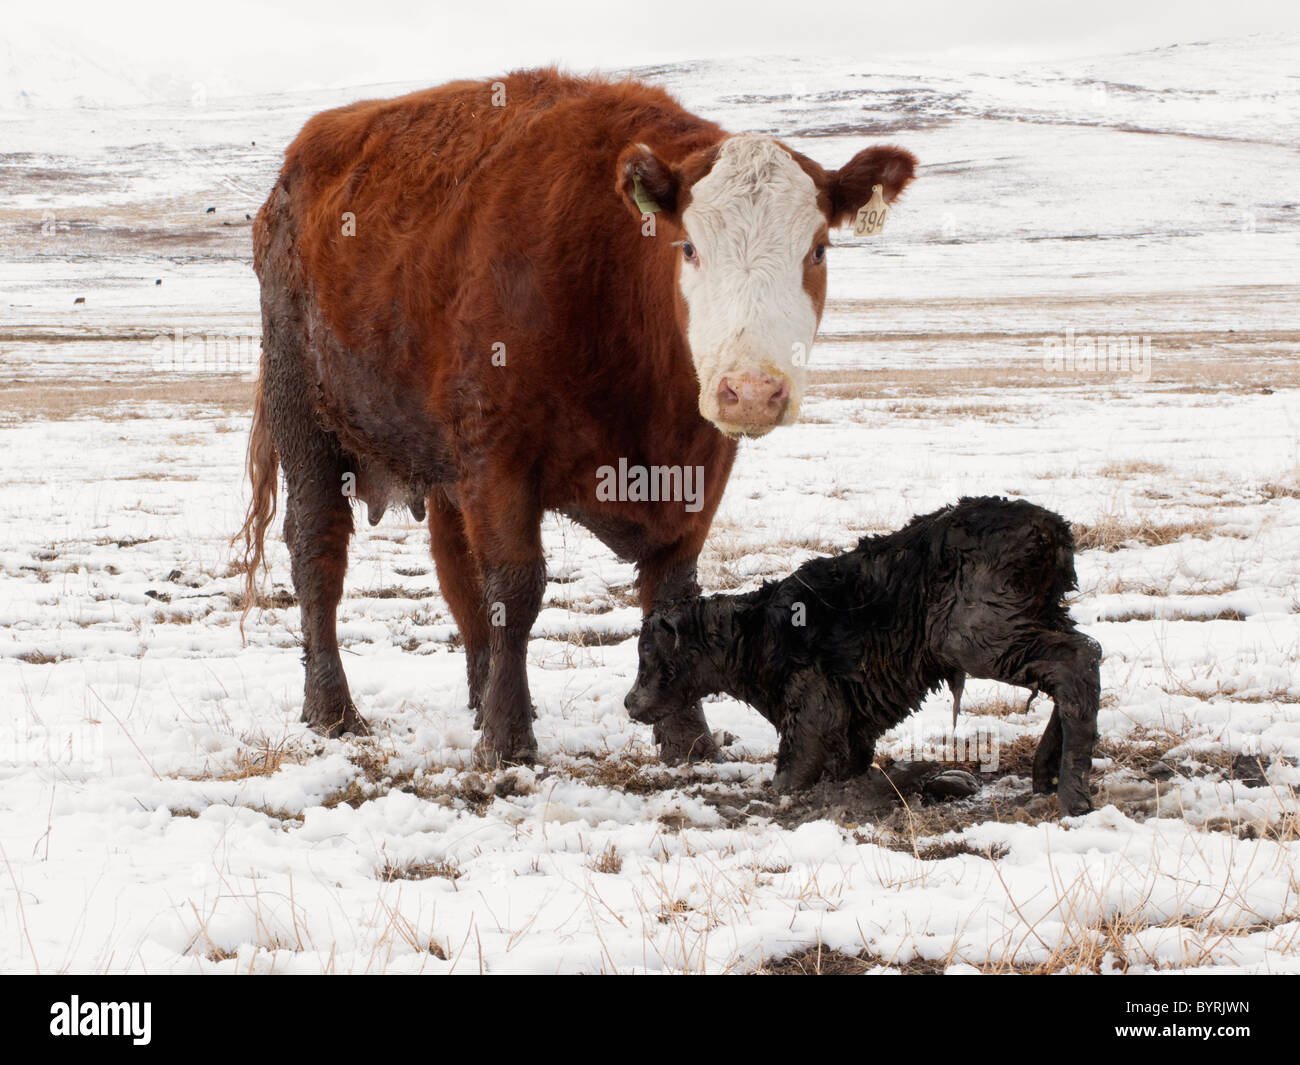 A Hereford cross cow stands over her newborn calf as it struggles to stand for the first time on a snow covered pasture / Canada Stock Photo